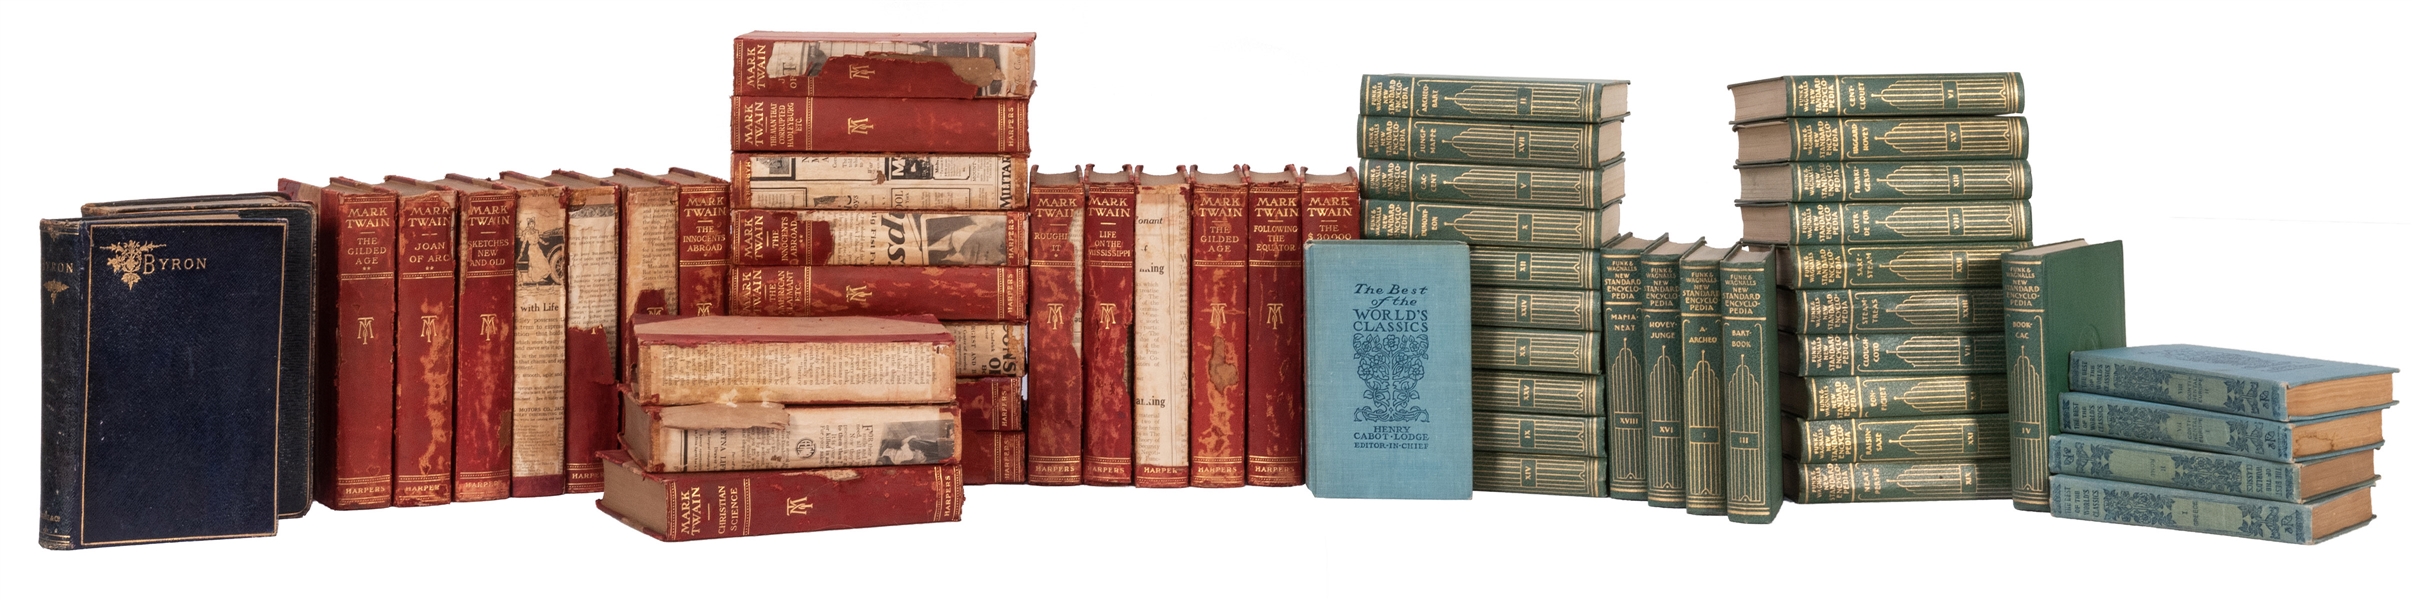  Works of Mark Twain and Other Book Sets. Includes The Writi...